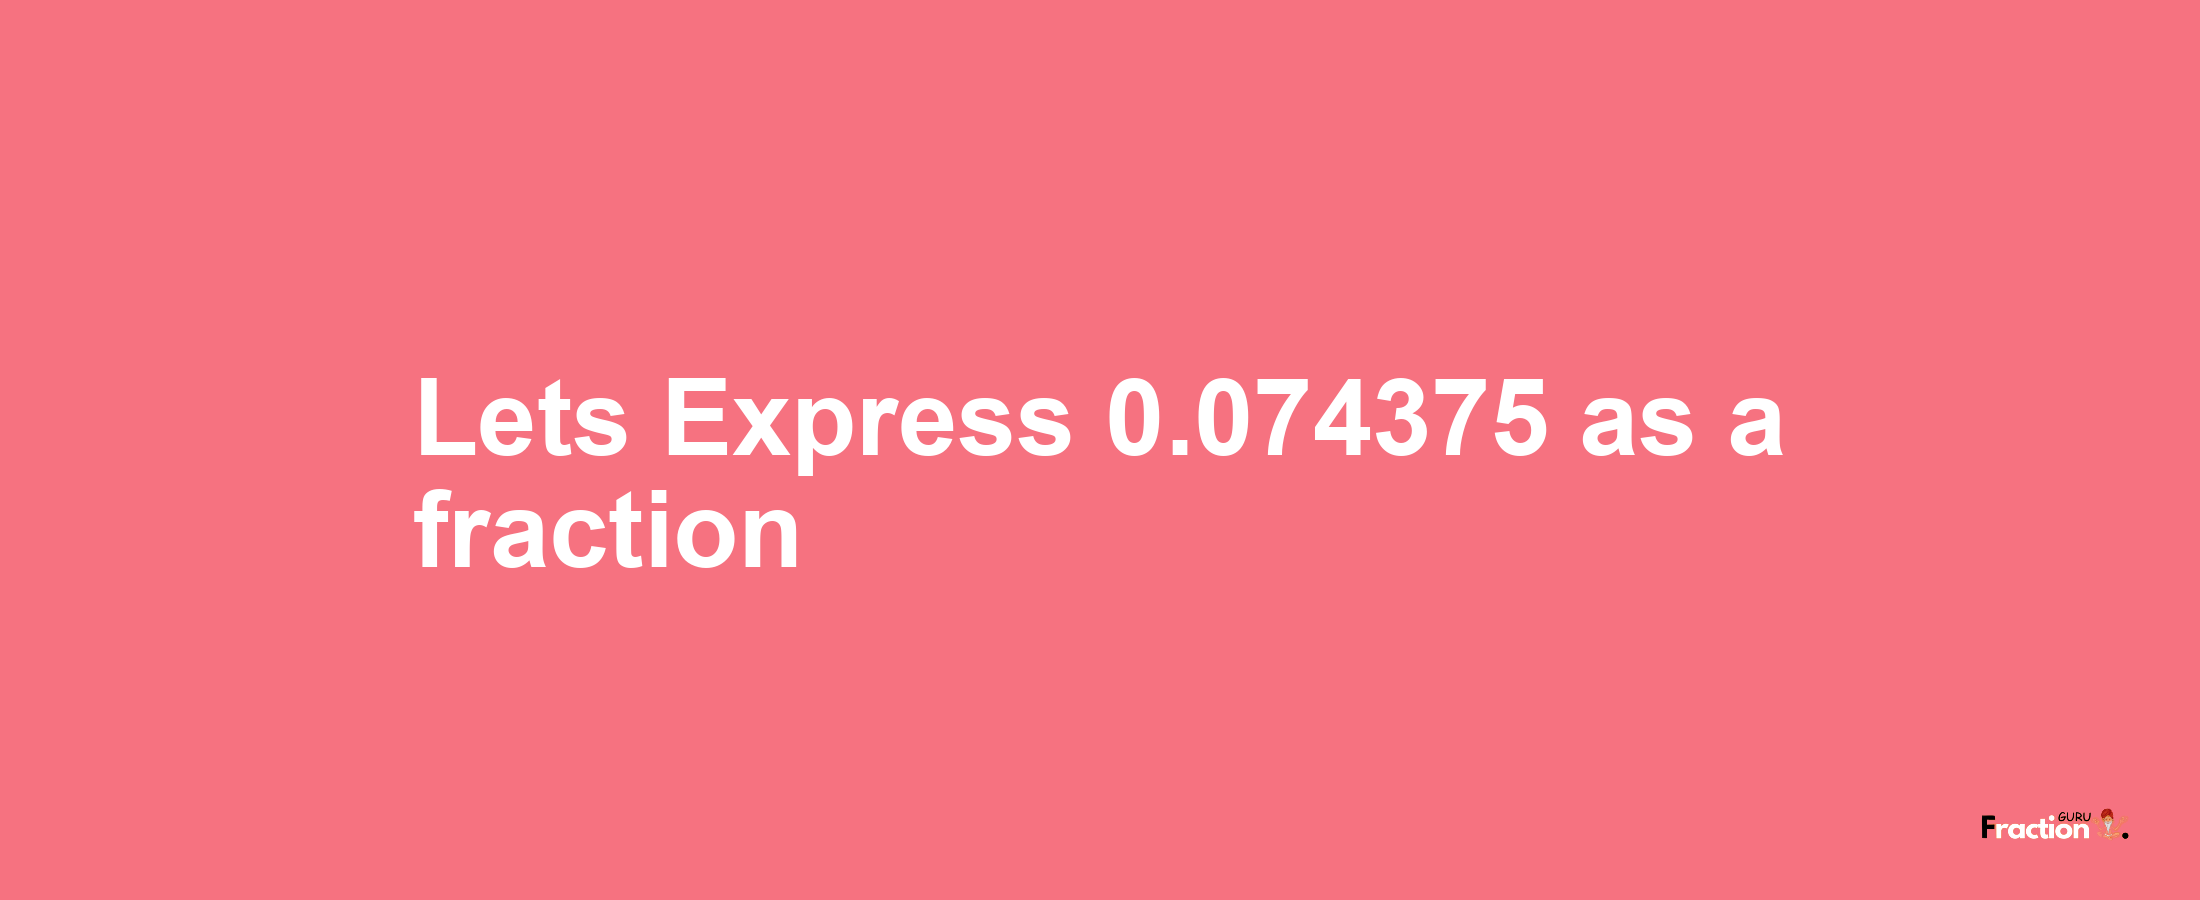 Lets Express 0.074375 as afraction